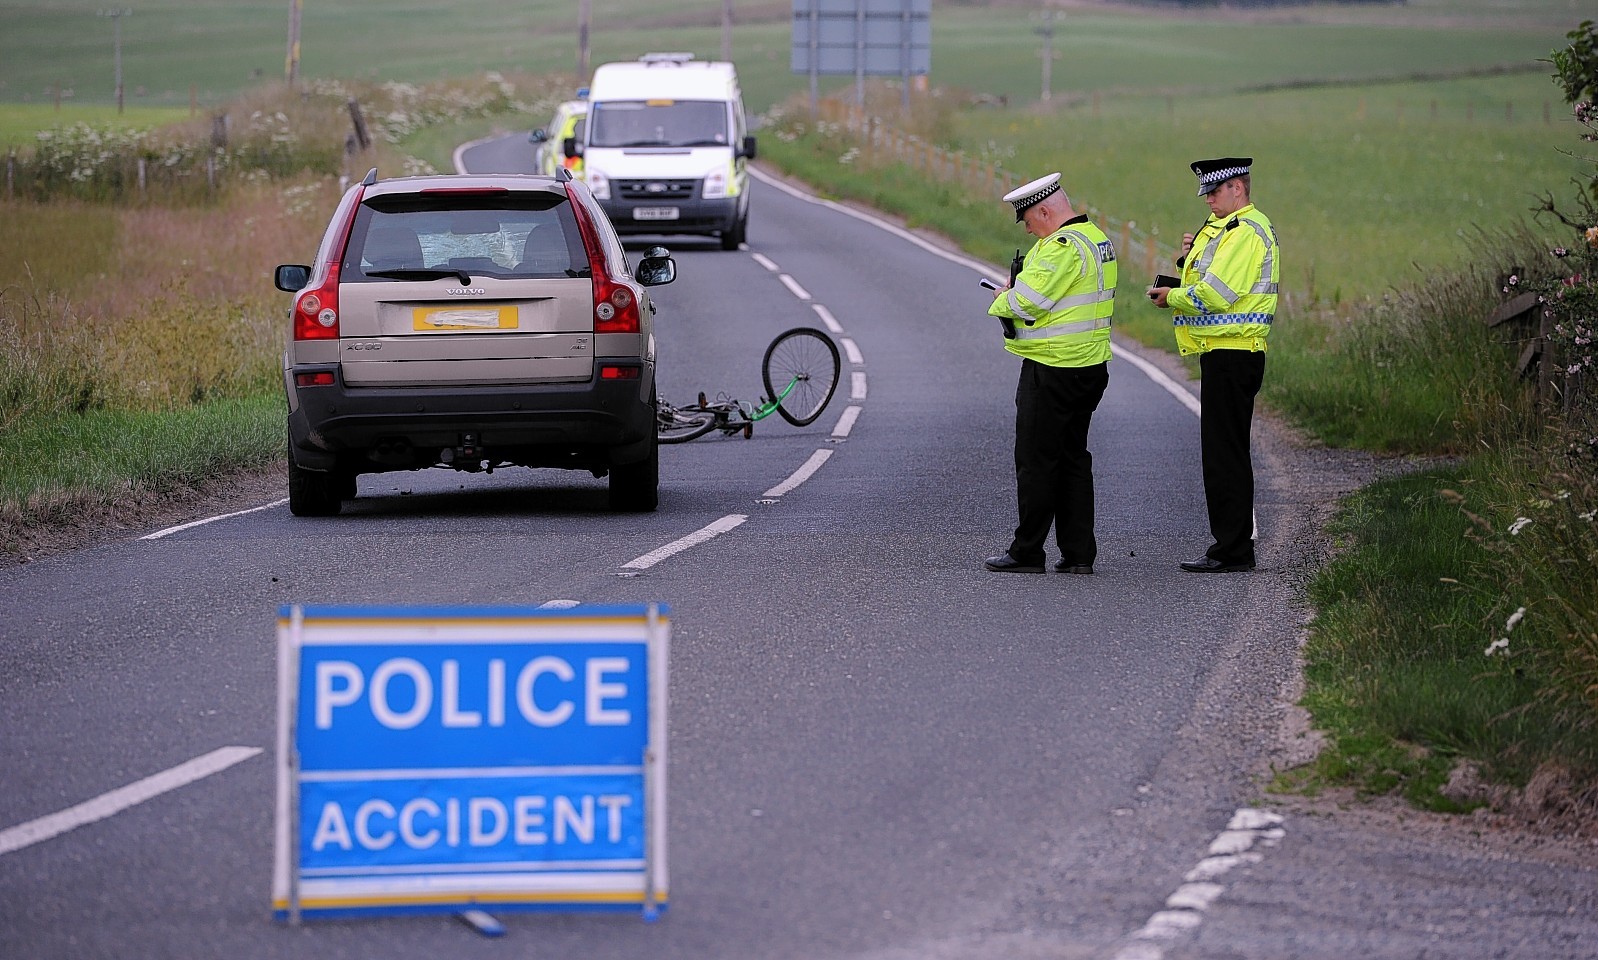 Scene of the fatal accident on the A975 between Newburgh and Cruden Bay